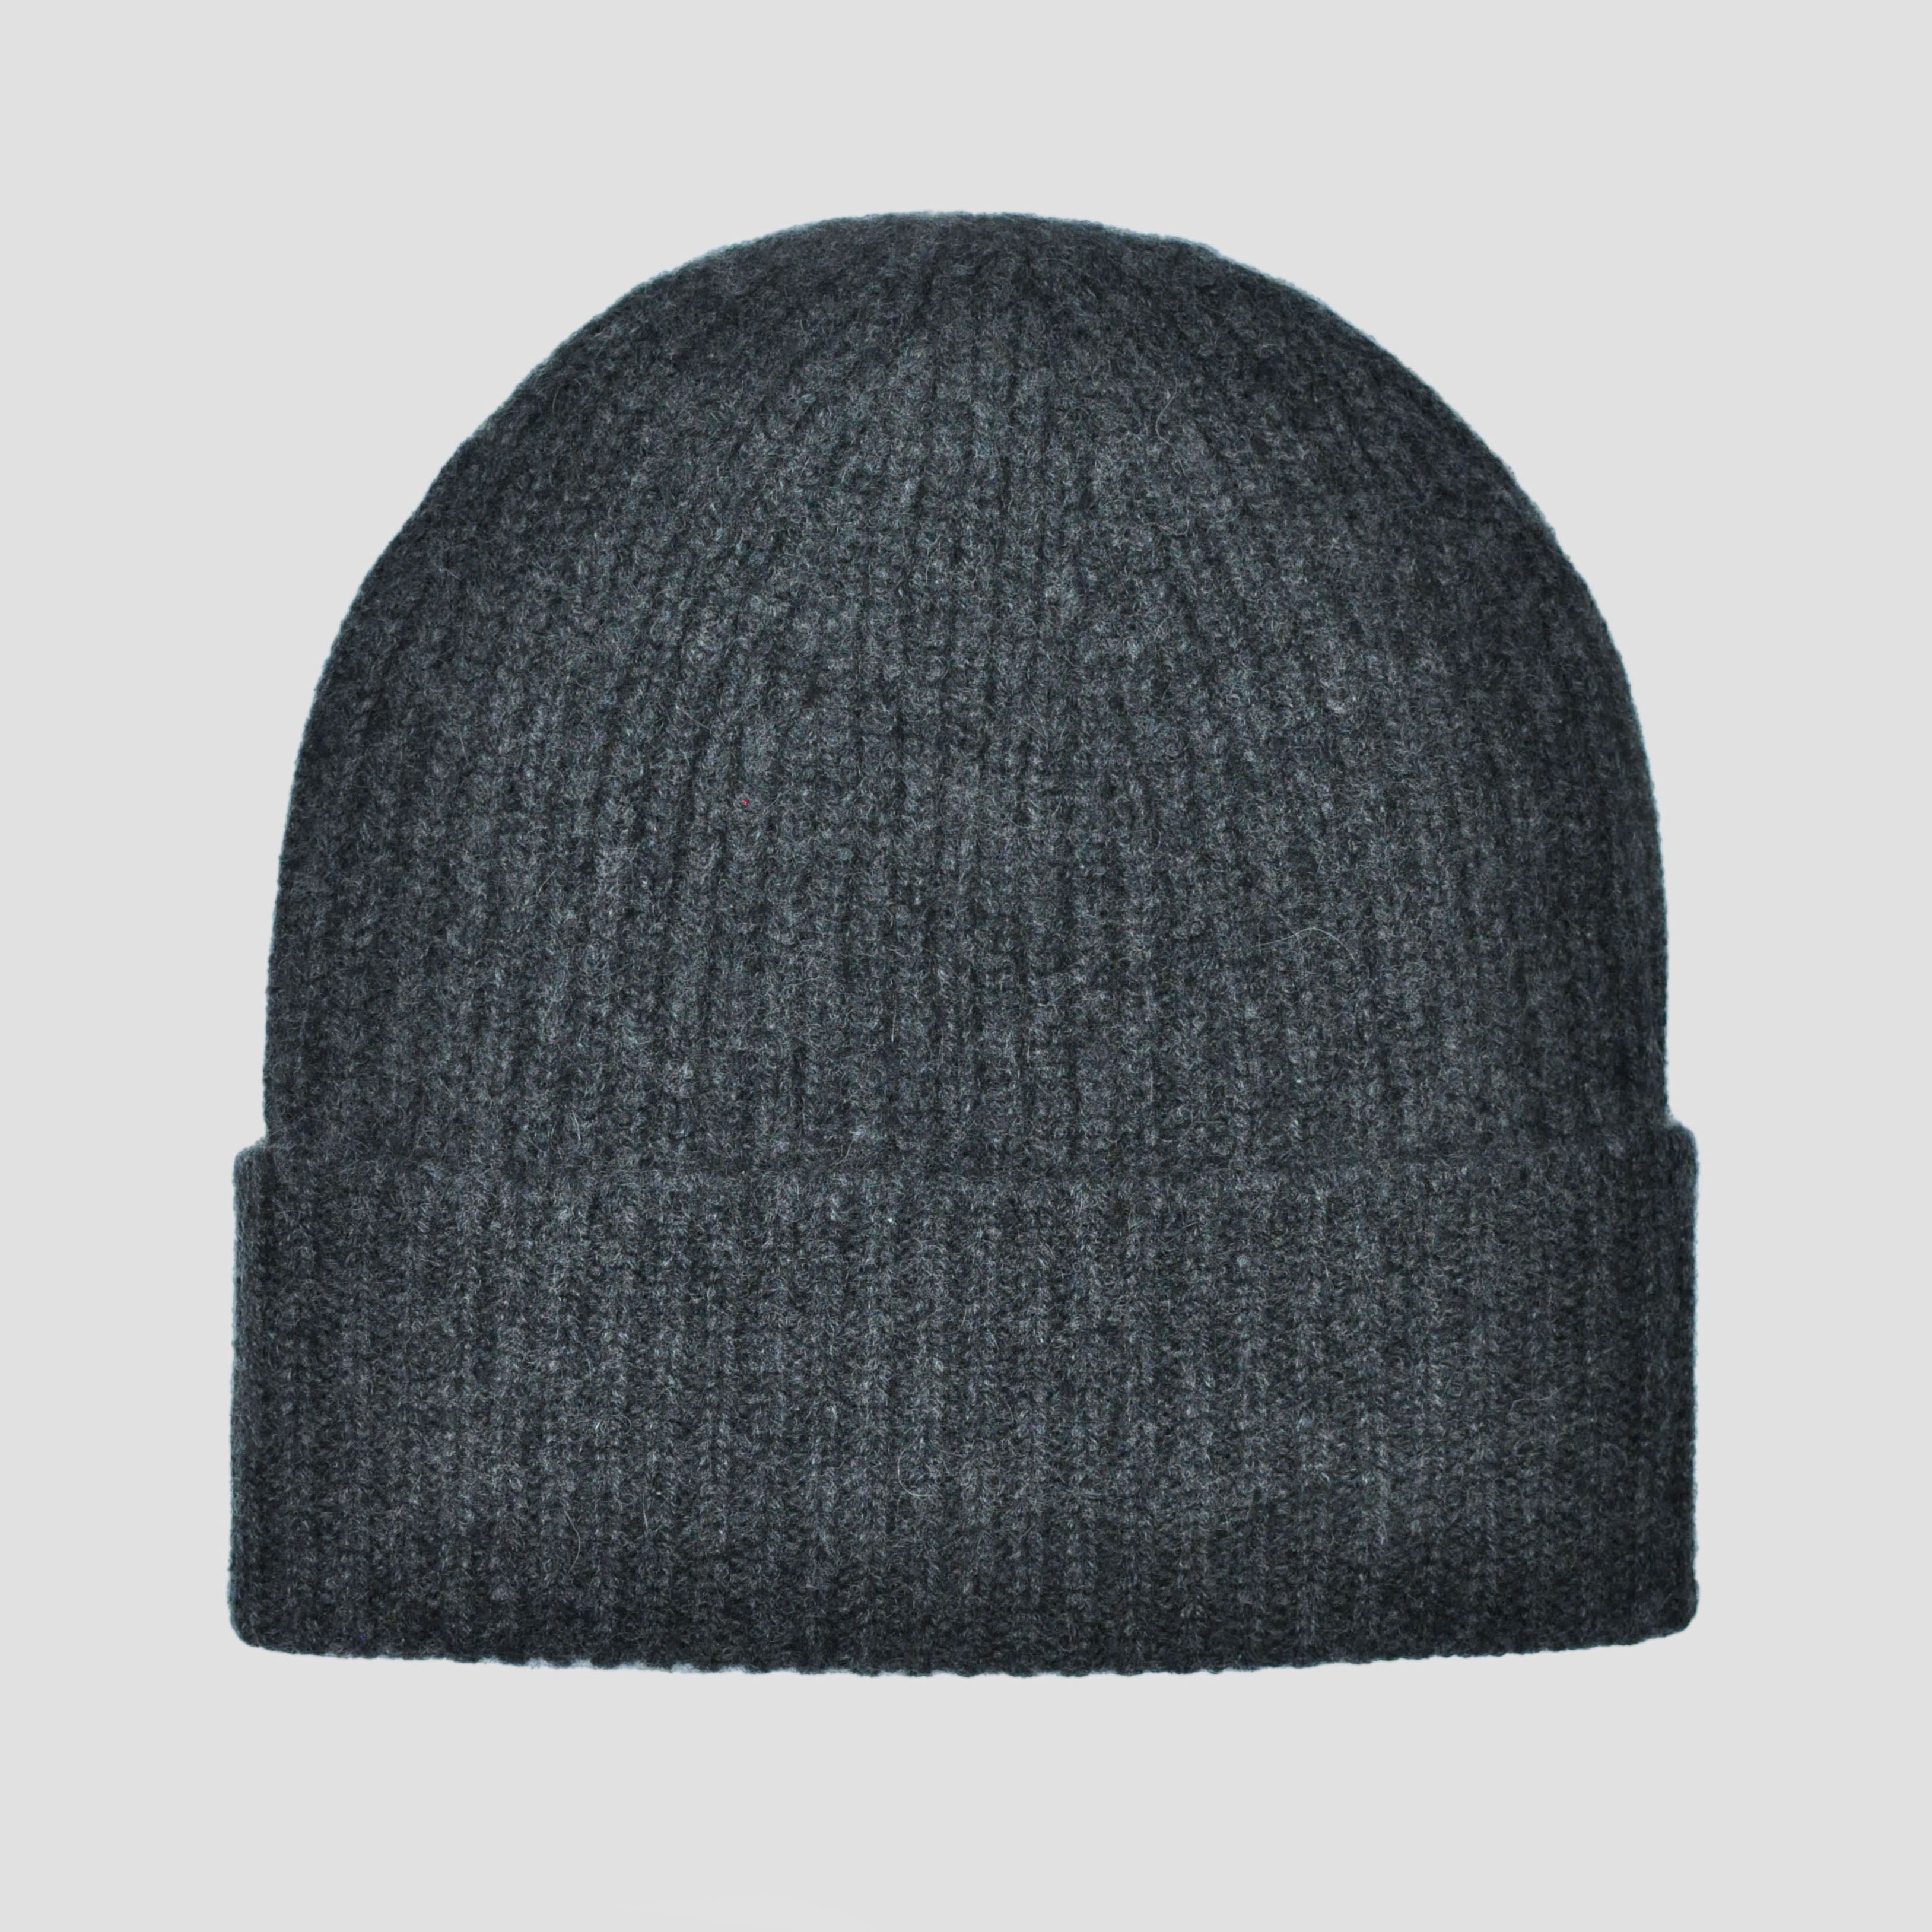 Two Ply Cashmere Winter Beanie in Charcoal